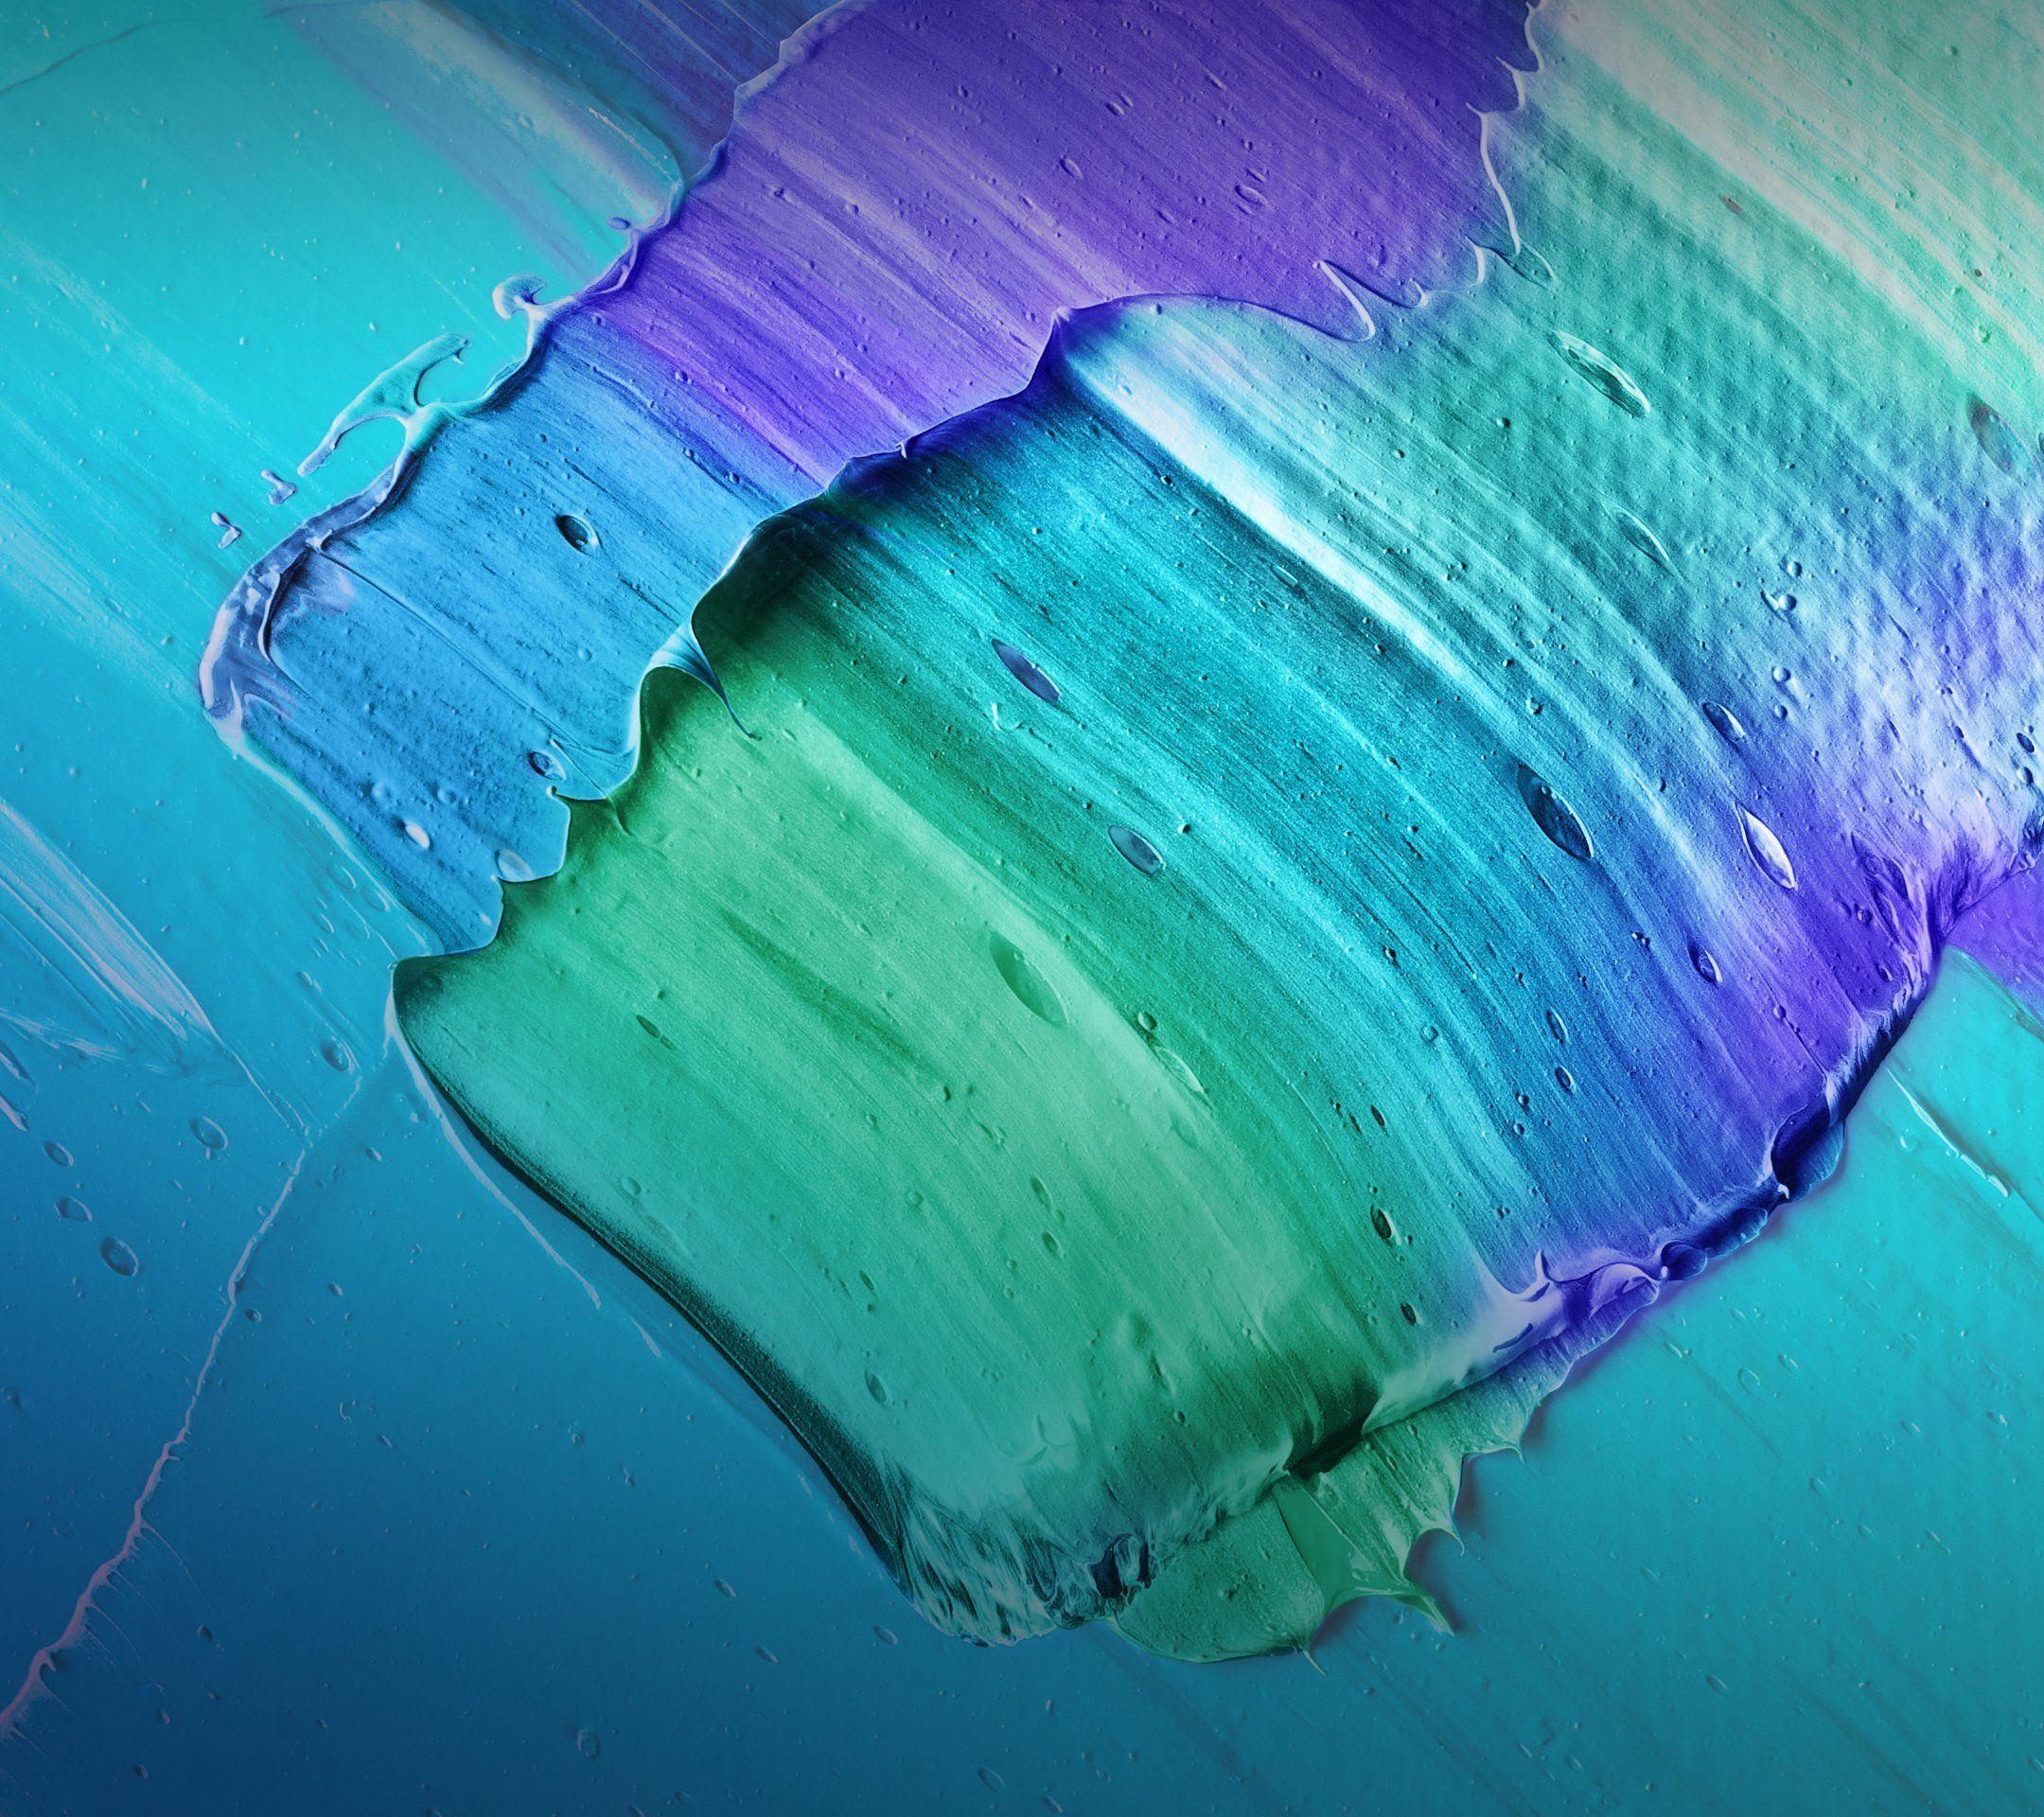 Get the default Moto X Style wallpaper here